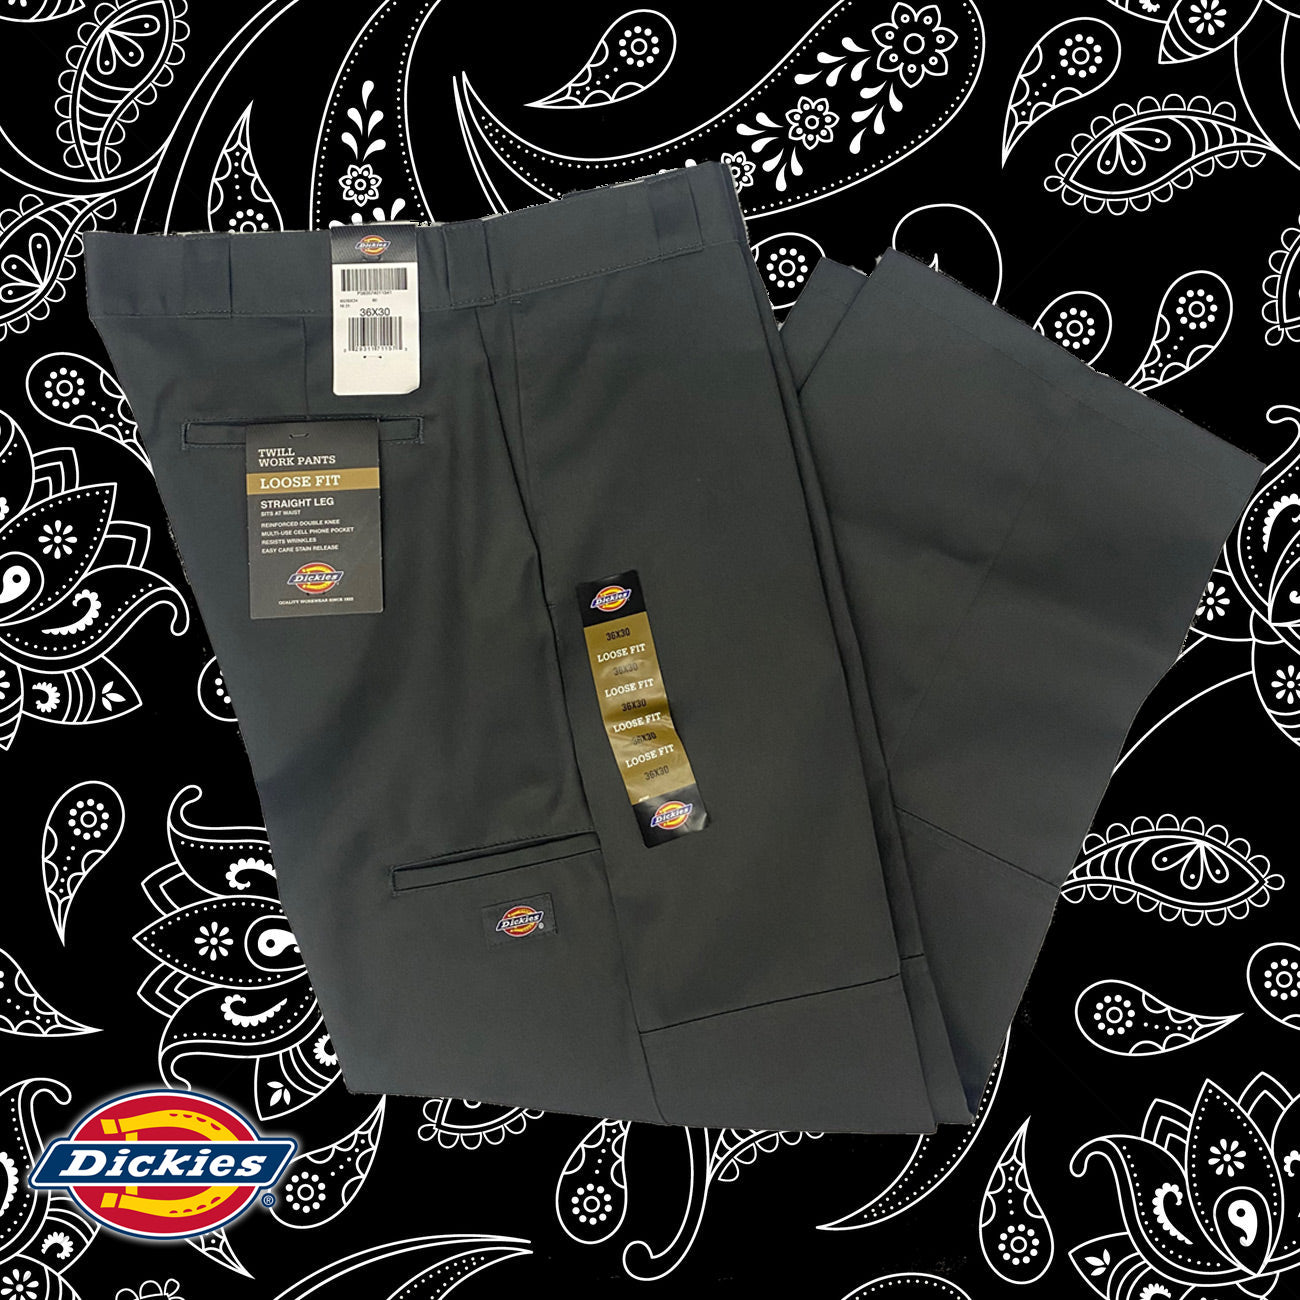 Dickies Mens Pants - 30 length only - Charcoal Gray – LifeStylez Store